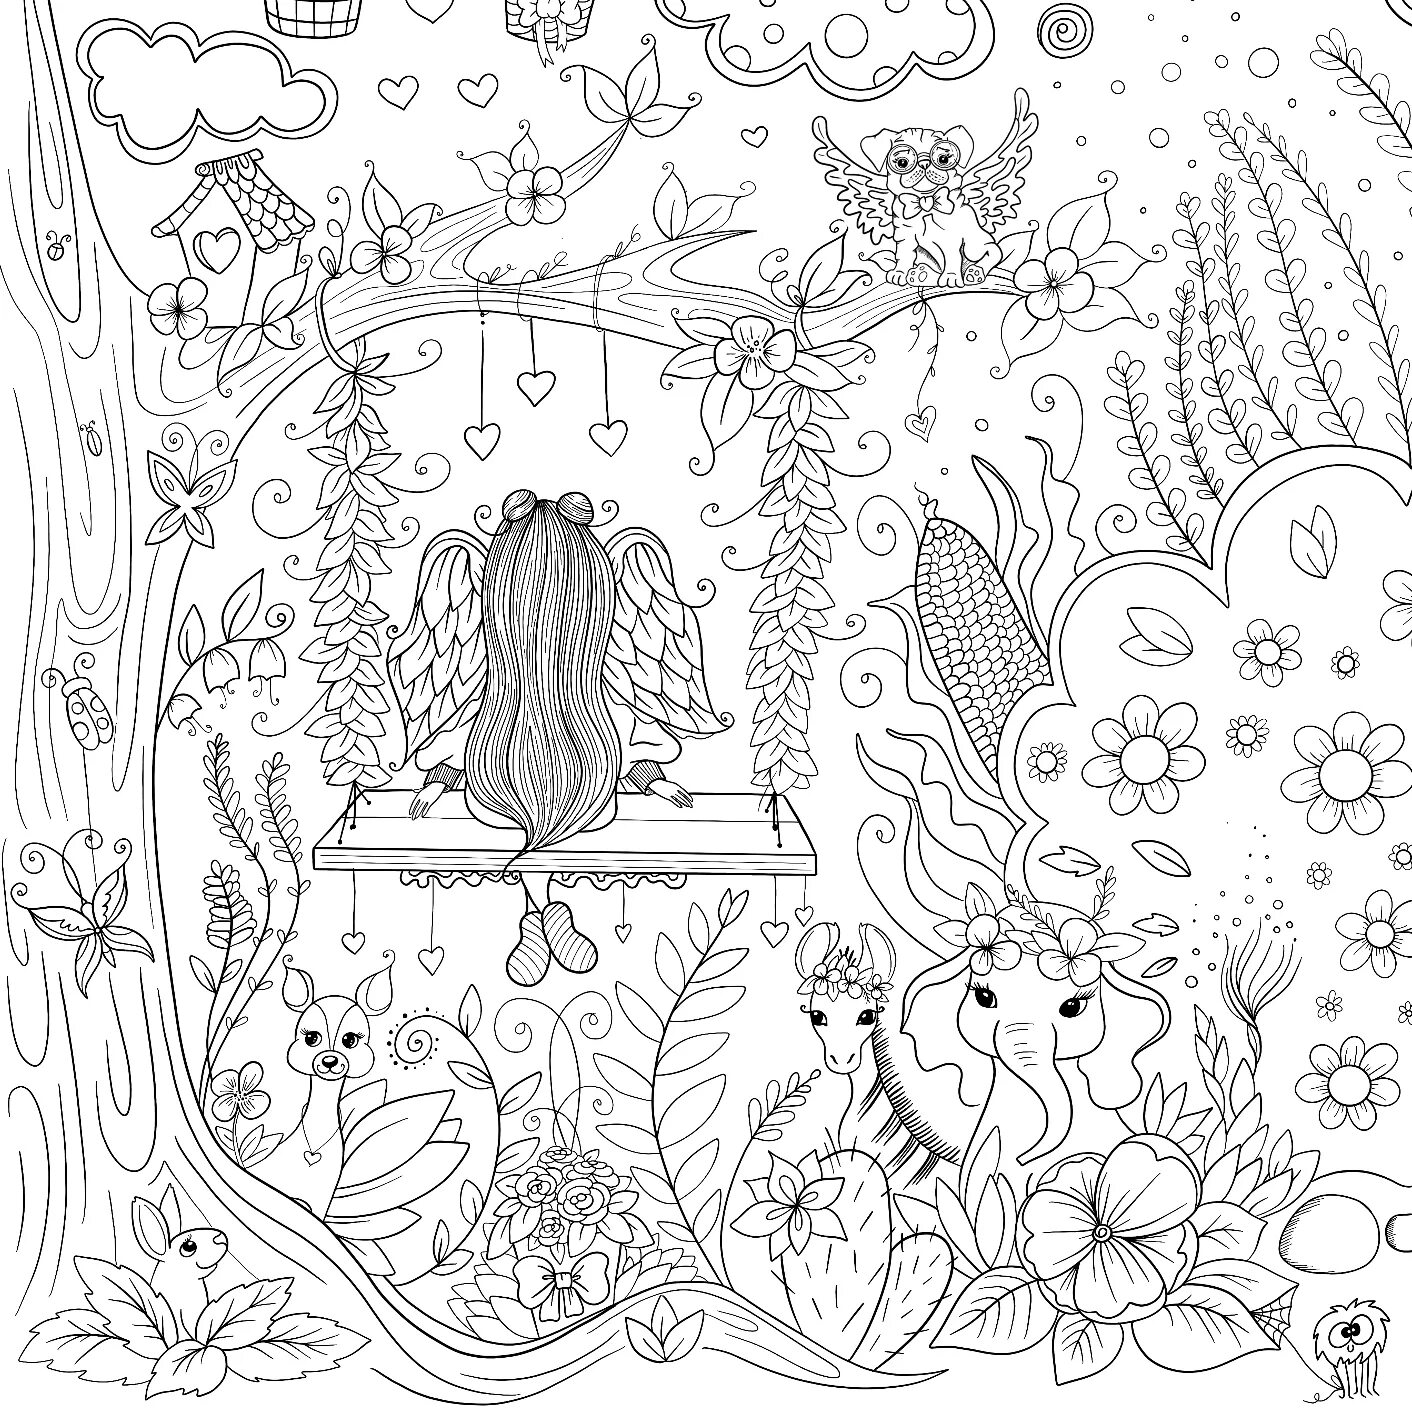 Unbeatable coloring page magic page how it works